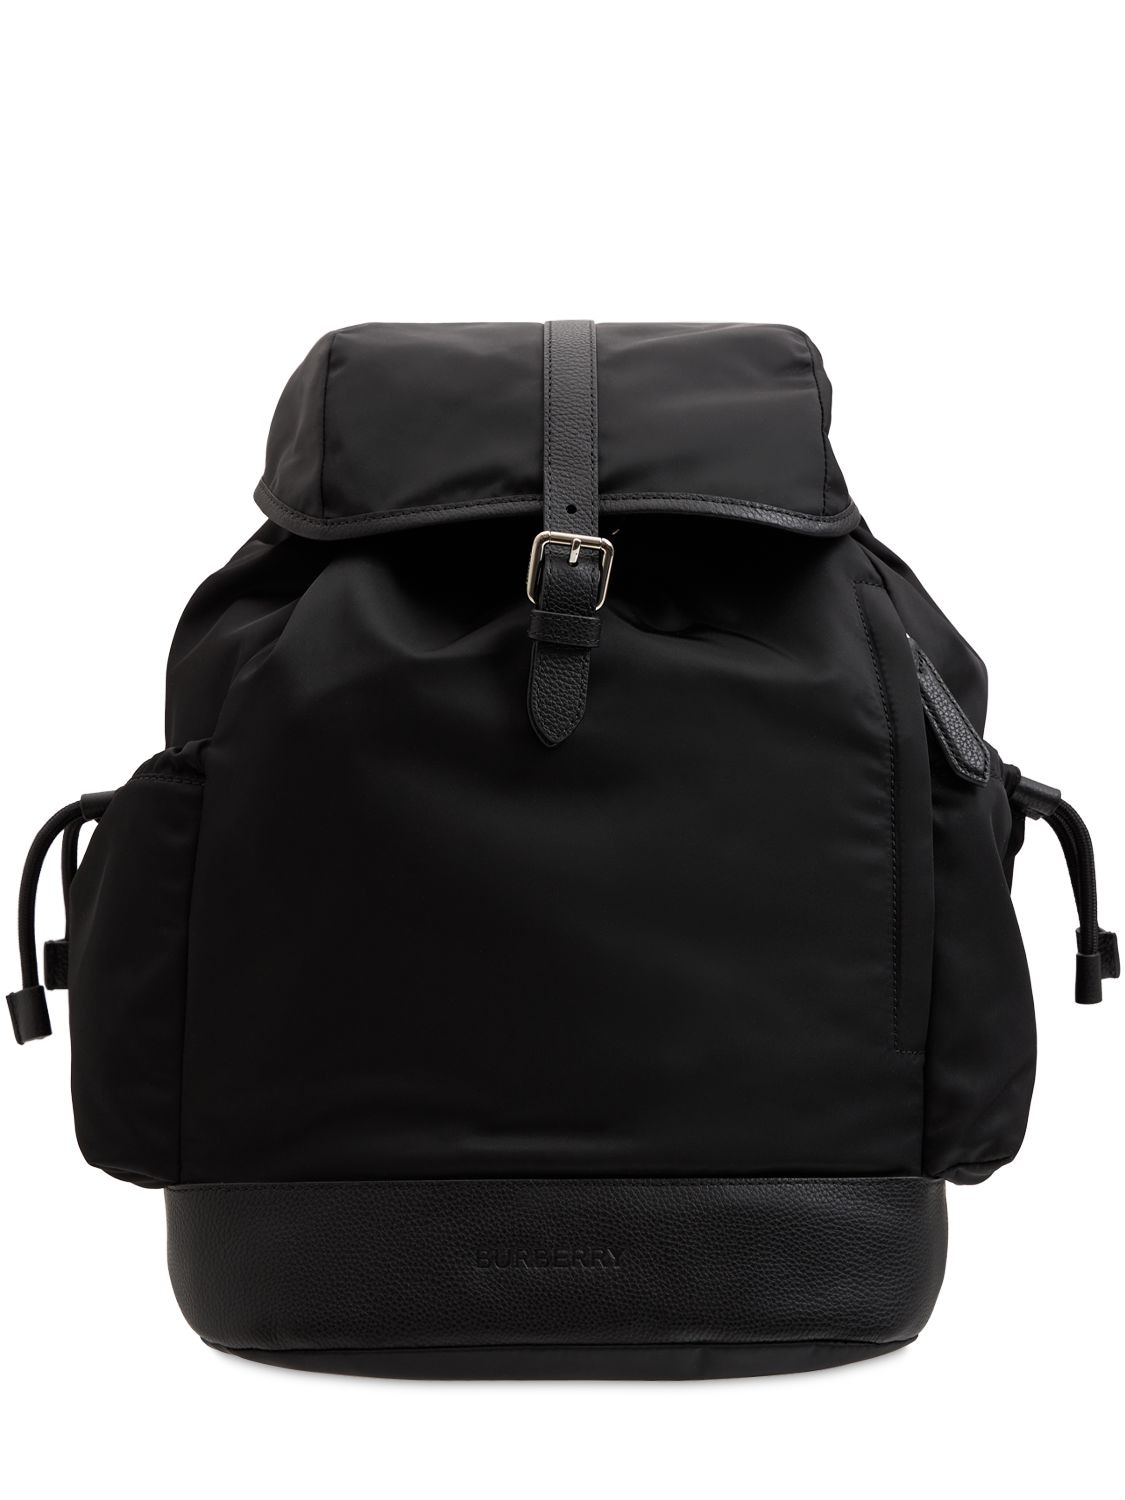 Nylon Backpack W/ Changing Pad